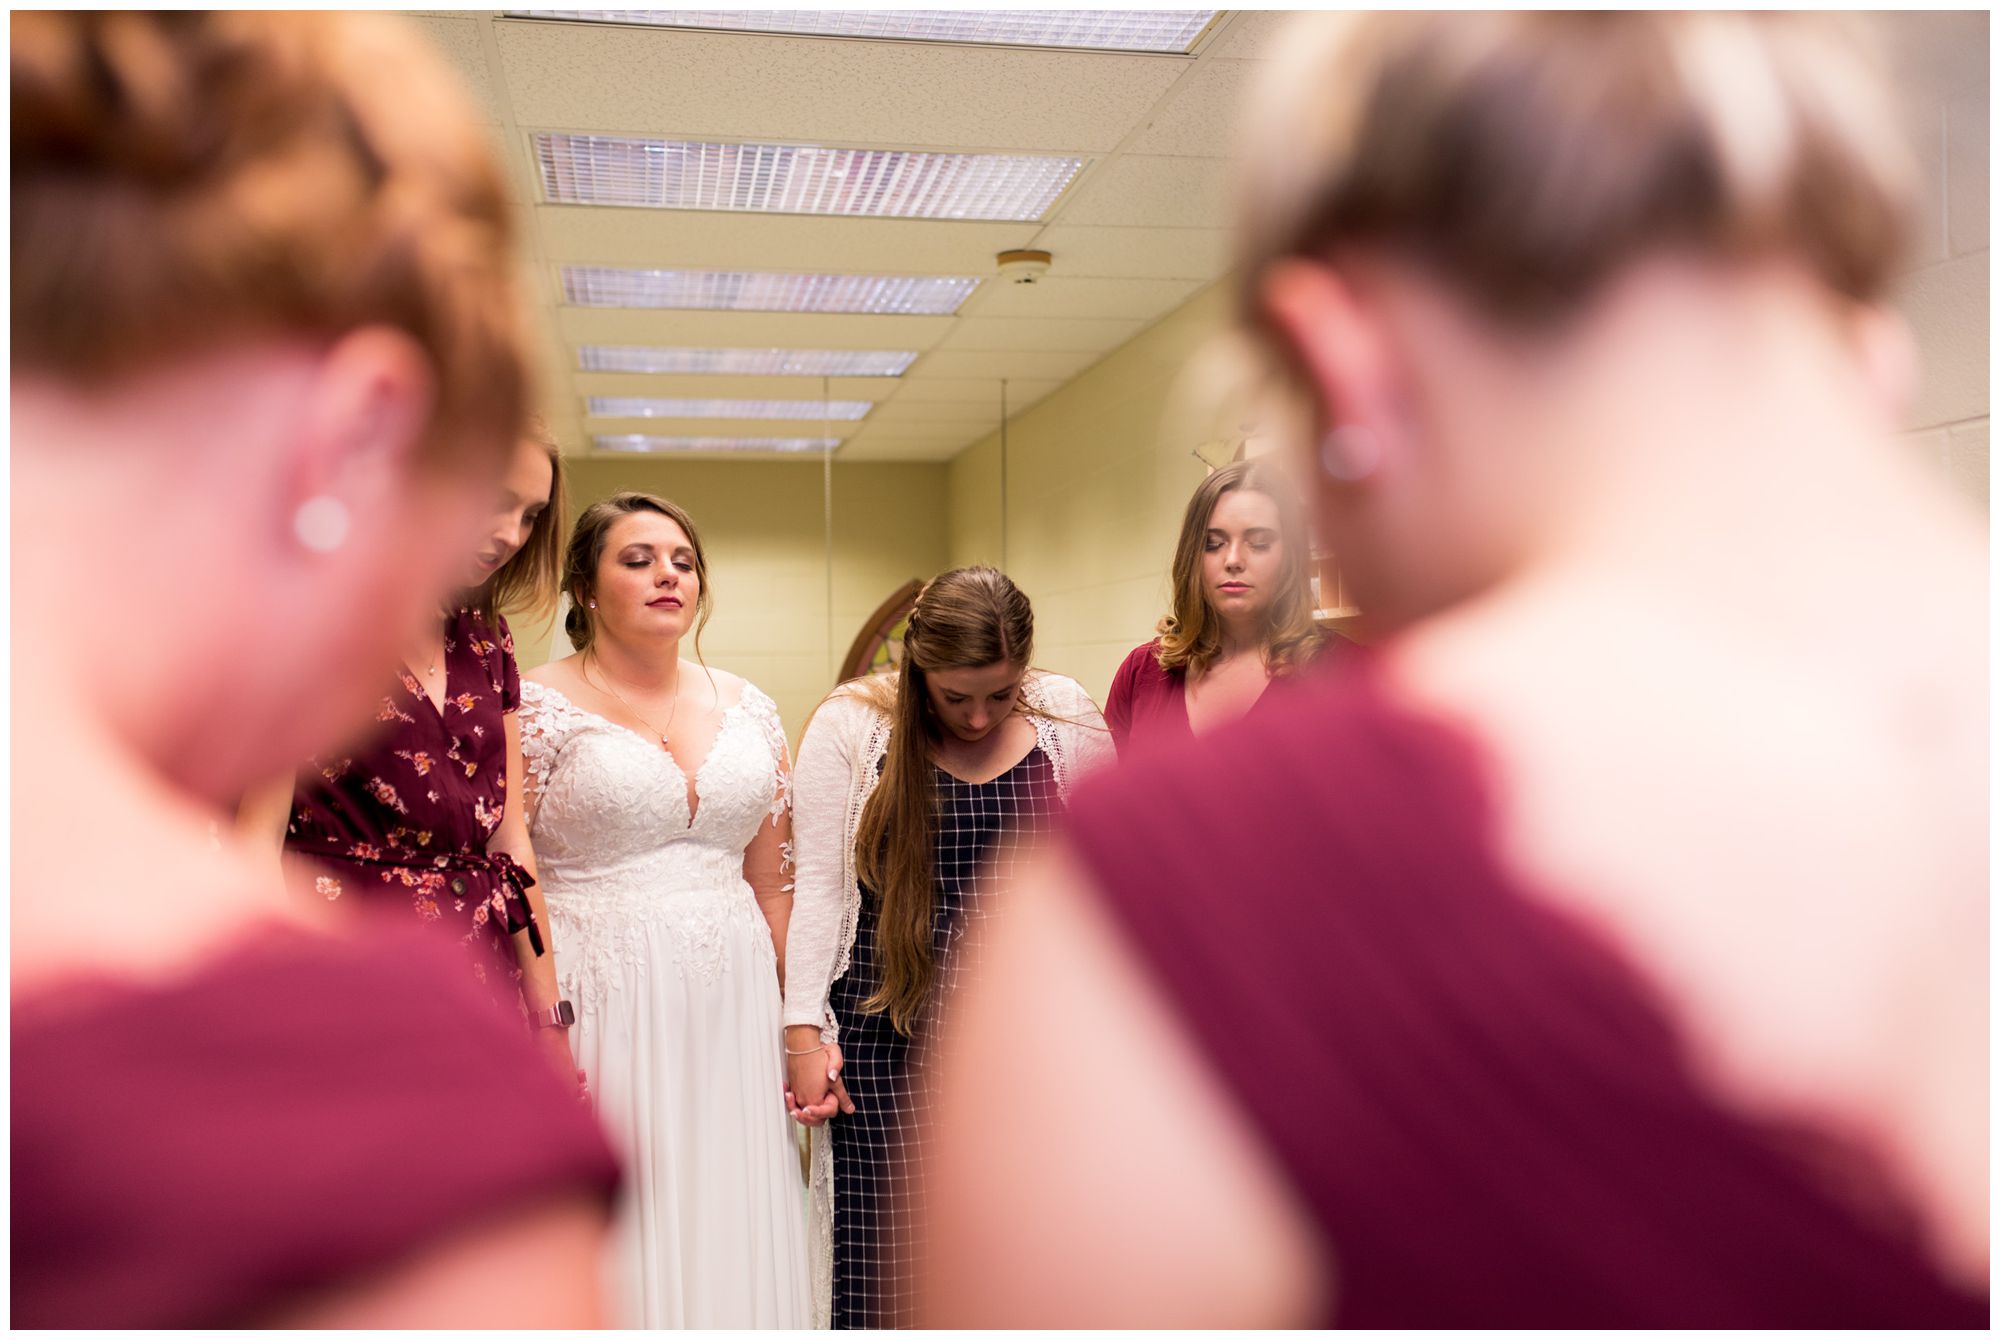 bride praying with friends before wedding ceremony at Zion Lutheran Church in Decatur